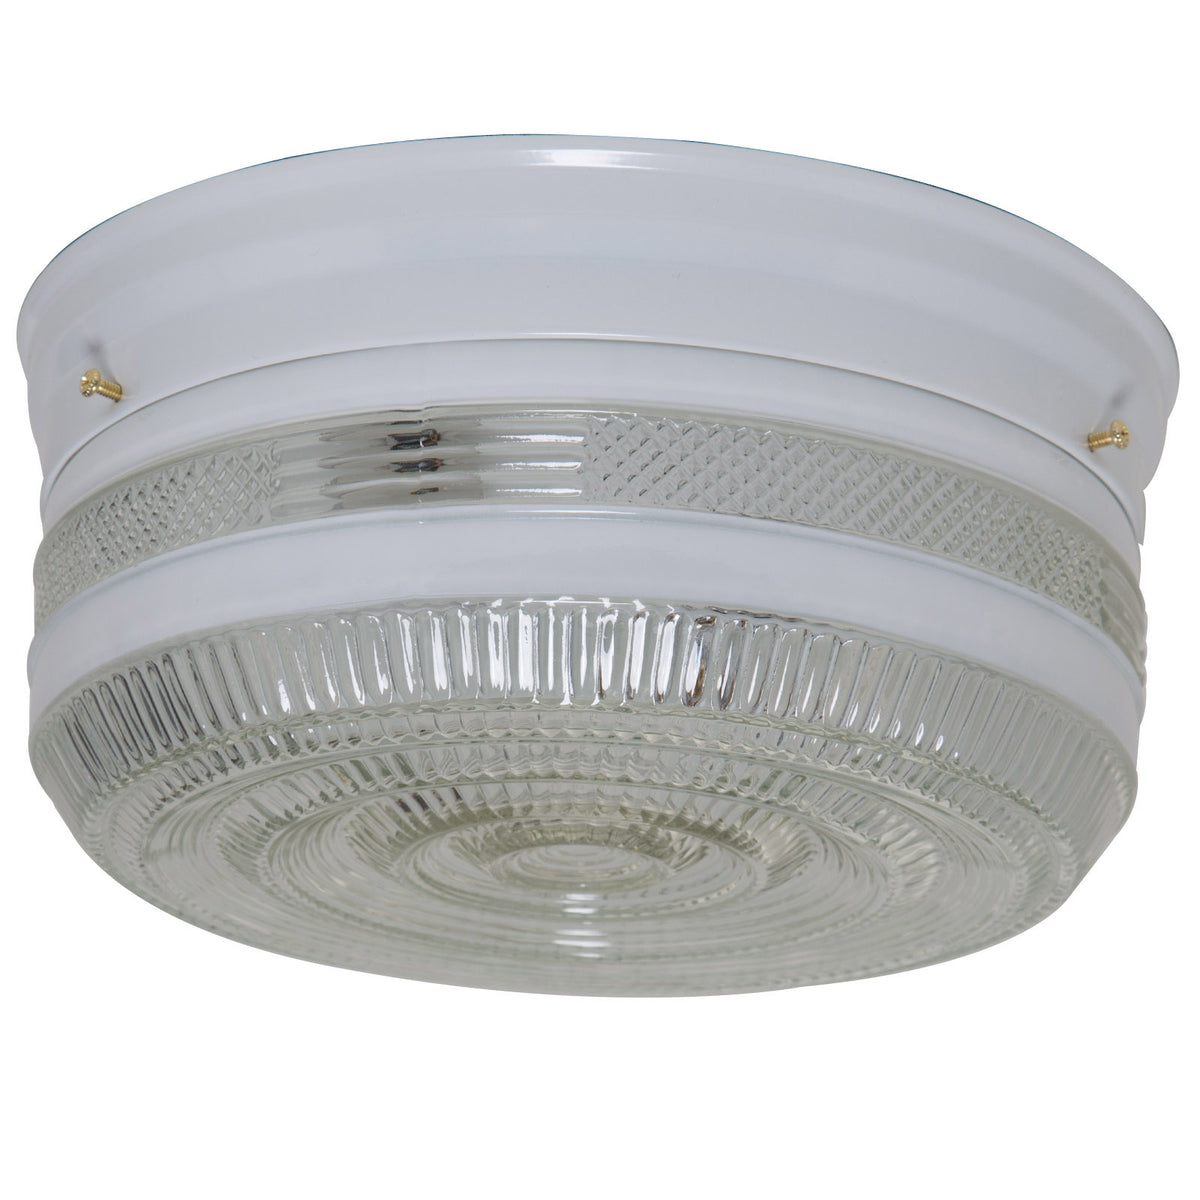 buy ceiling light fixtures at cheap rate in bulk. wholesale & retail commercial lighting supplies store. home décor ideas, maintenance, repair replacement parts